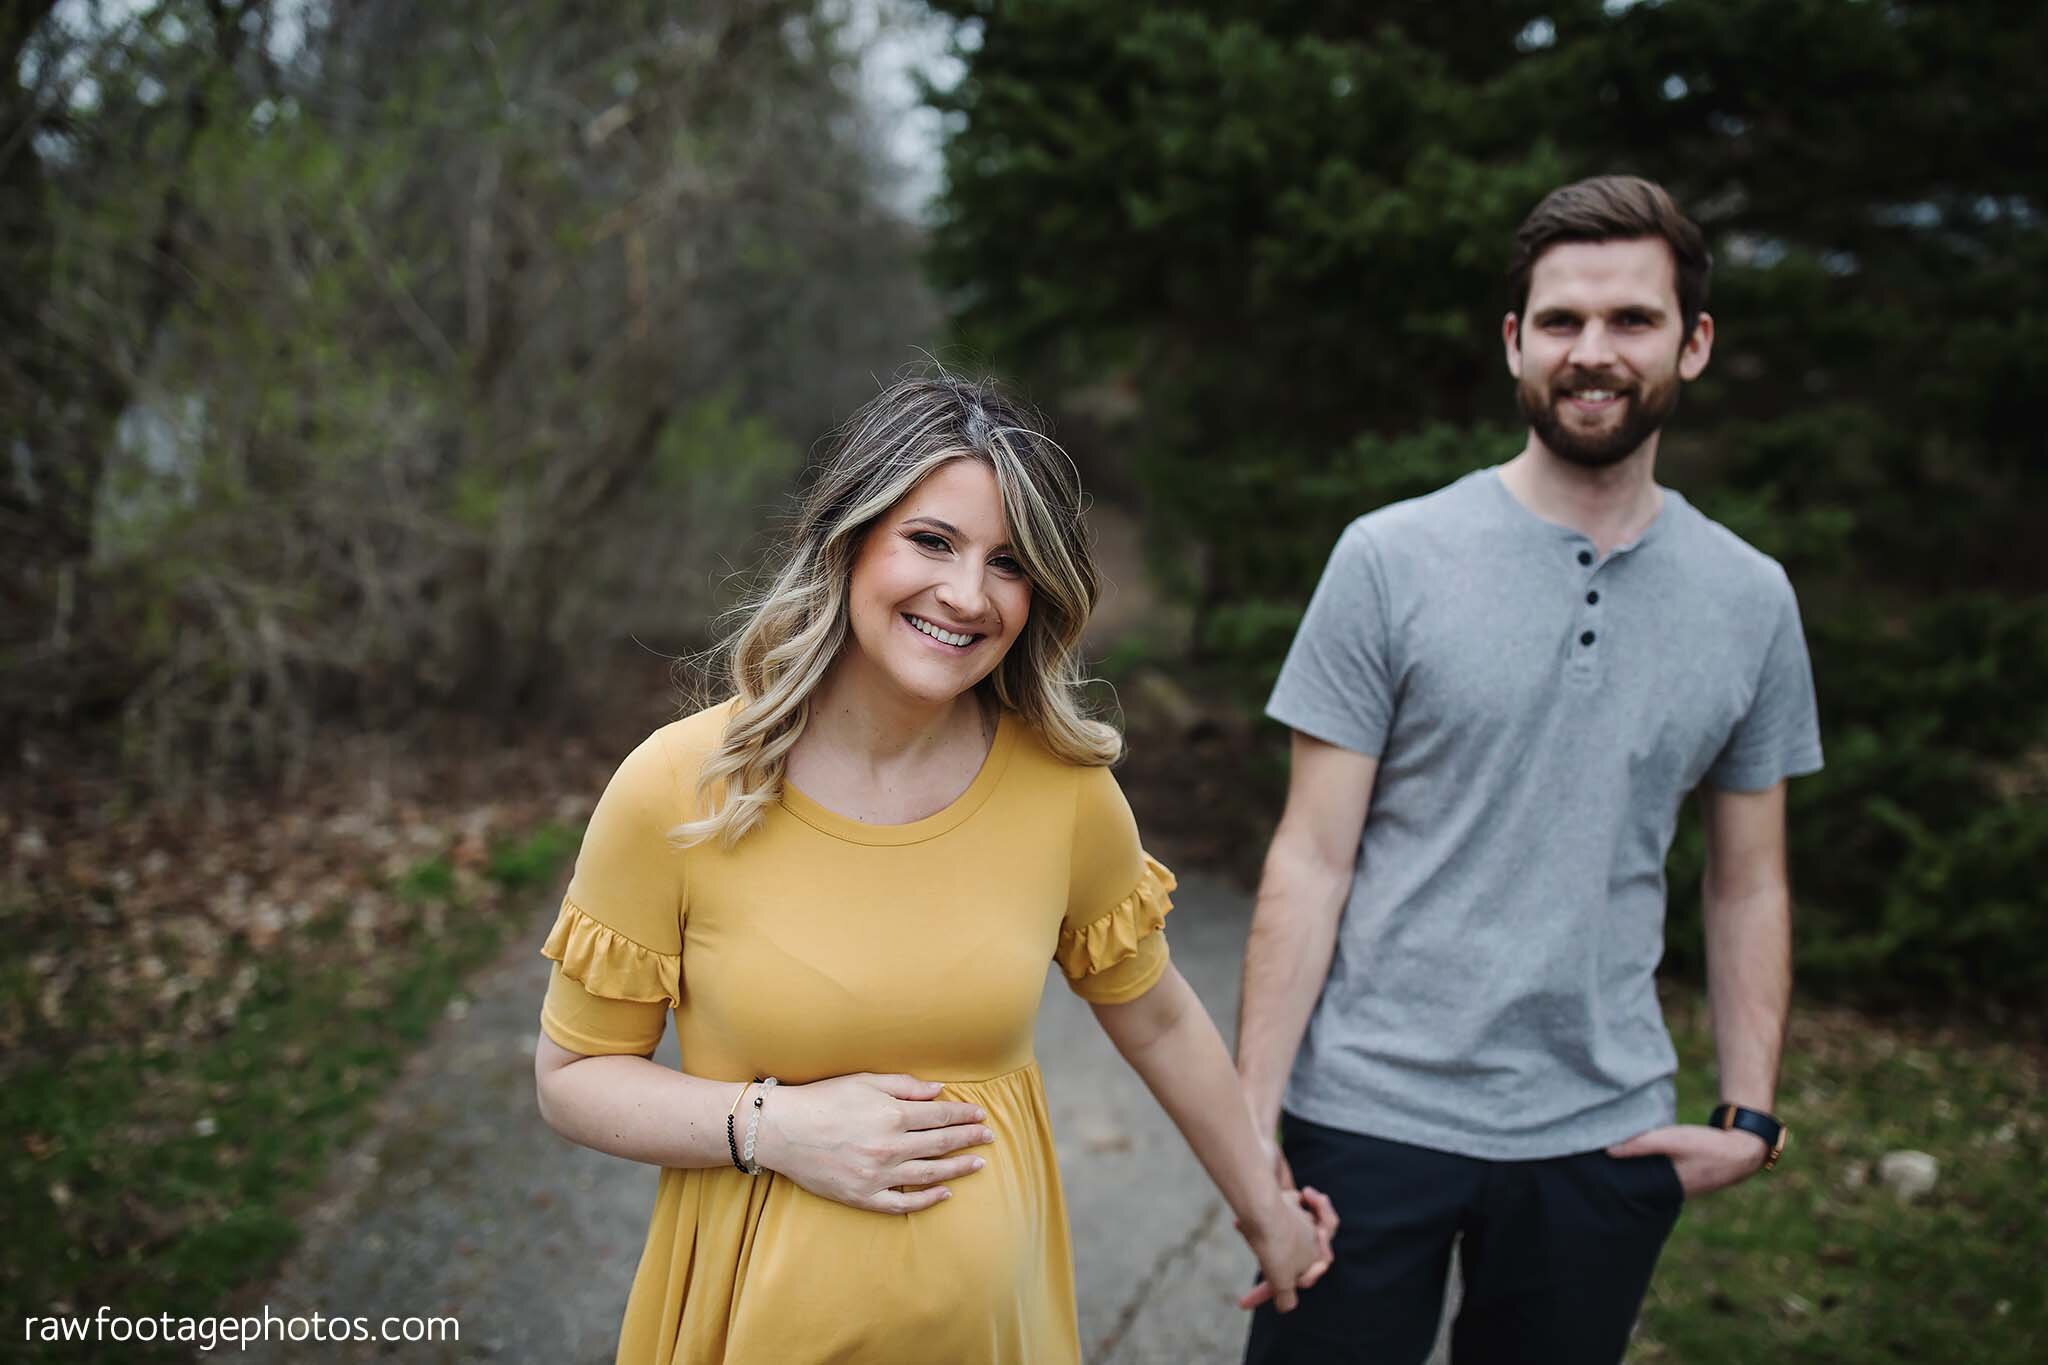 london_ontario_maternity_photographer-raw_footage_photography-in_home_lifestyle_maternity-forest_maternity_session-yellow_maternity_dress_031.jpg